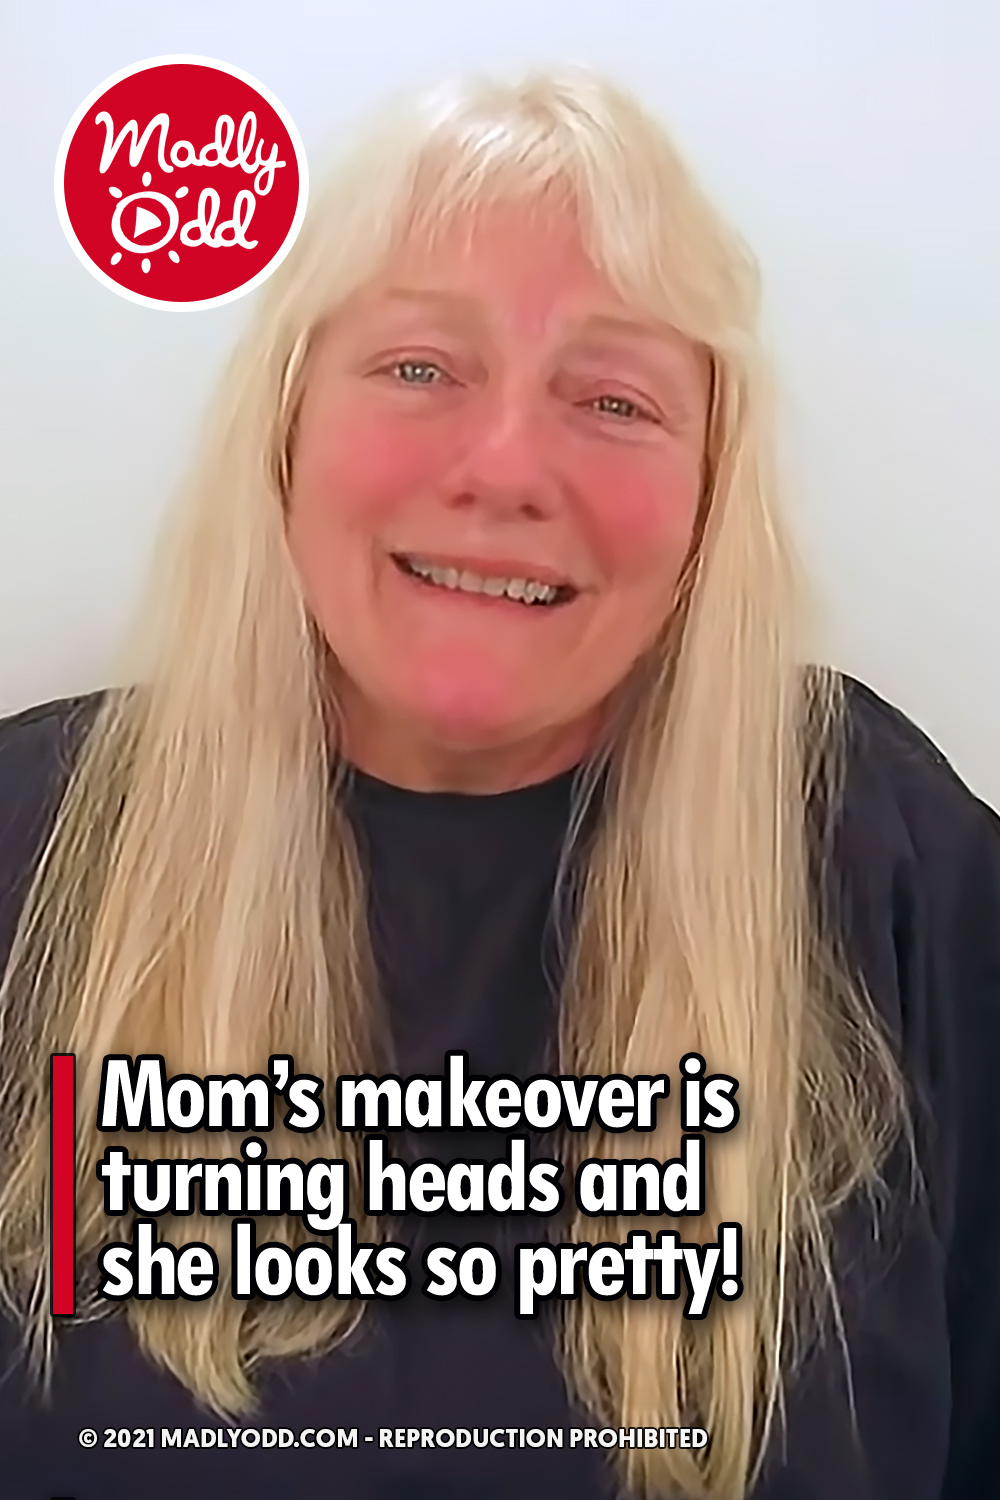 Mom’s makeover is turning heads and she looks so pretty!